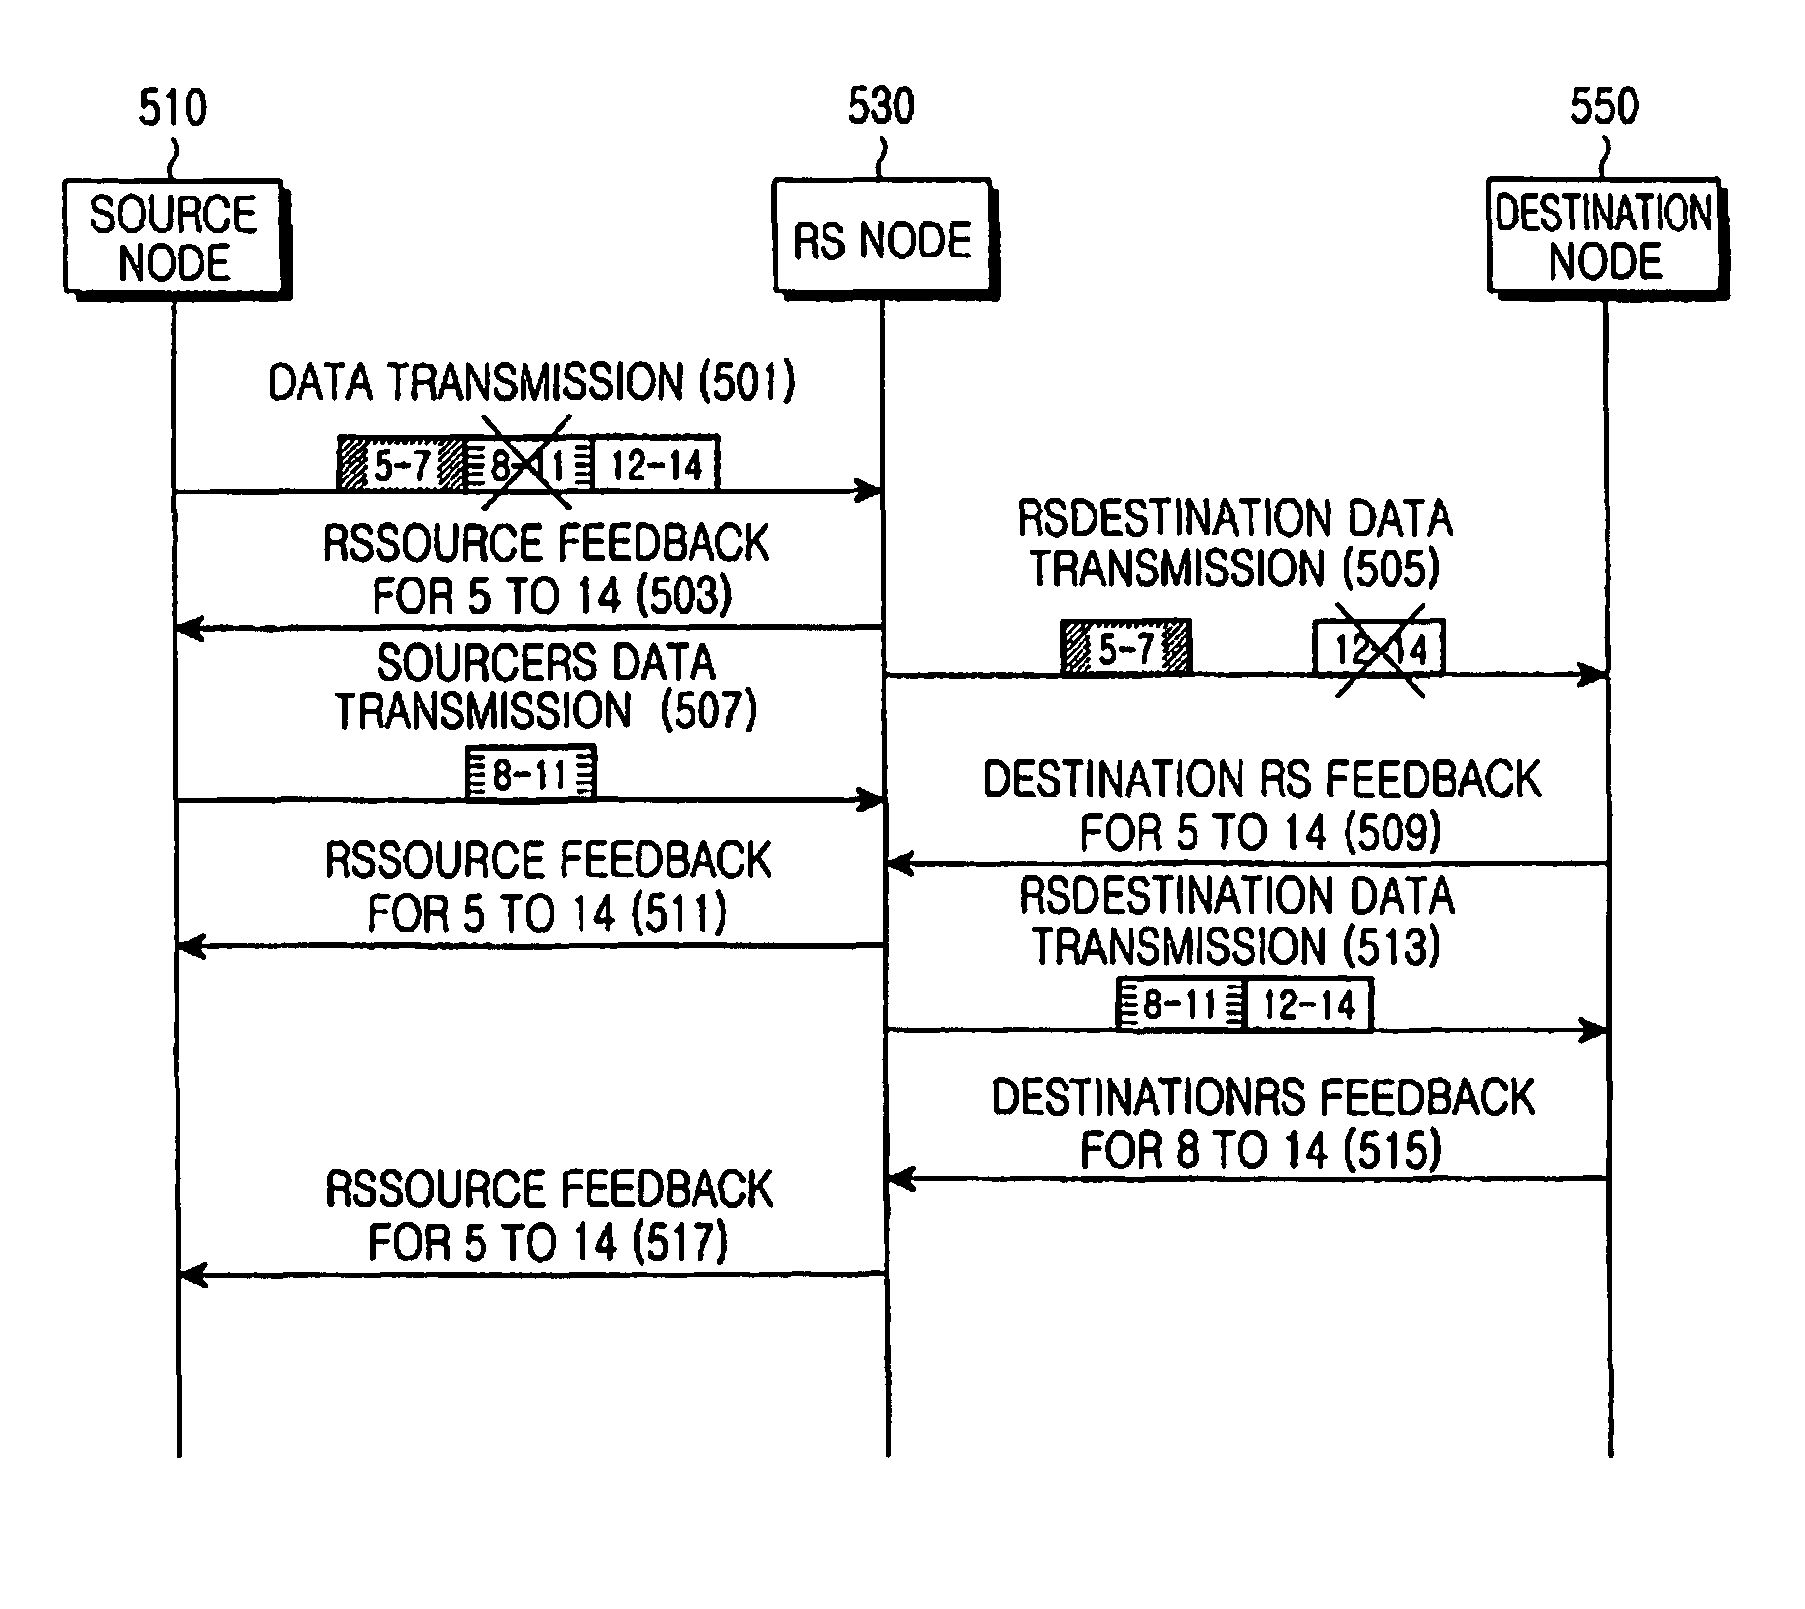 Method and apparatus for automatic repeat request in a multi-hop broadband wireless communication system